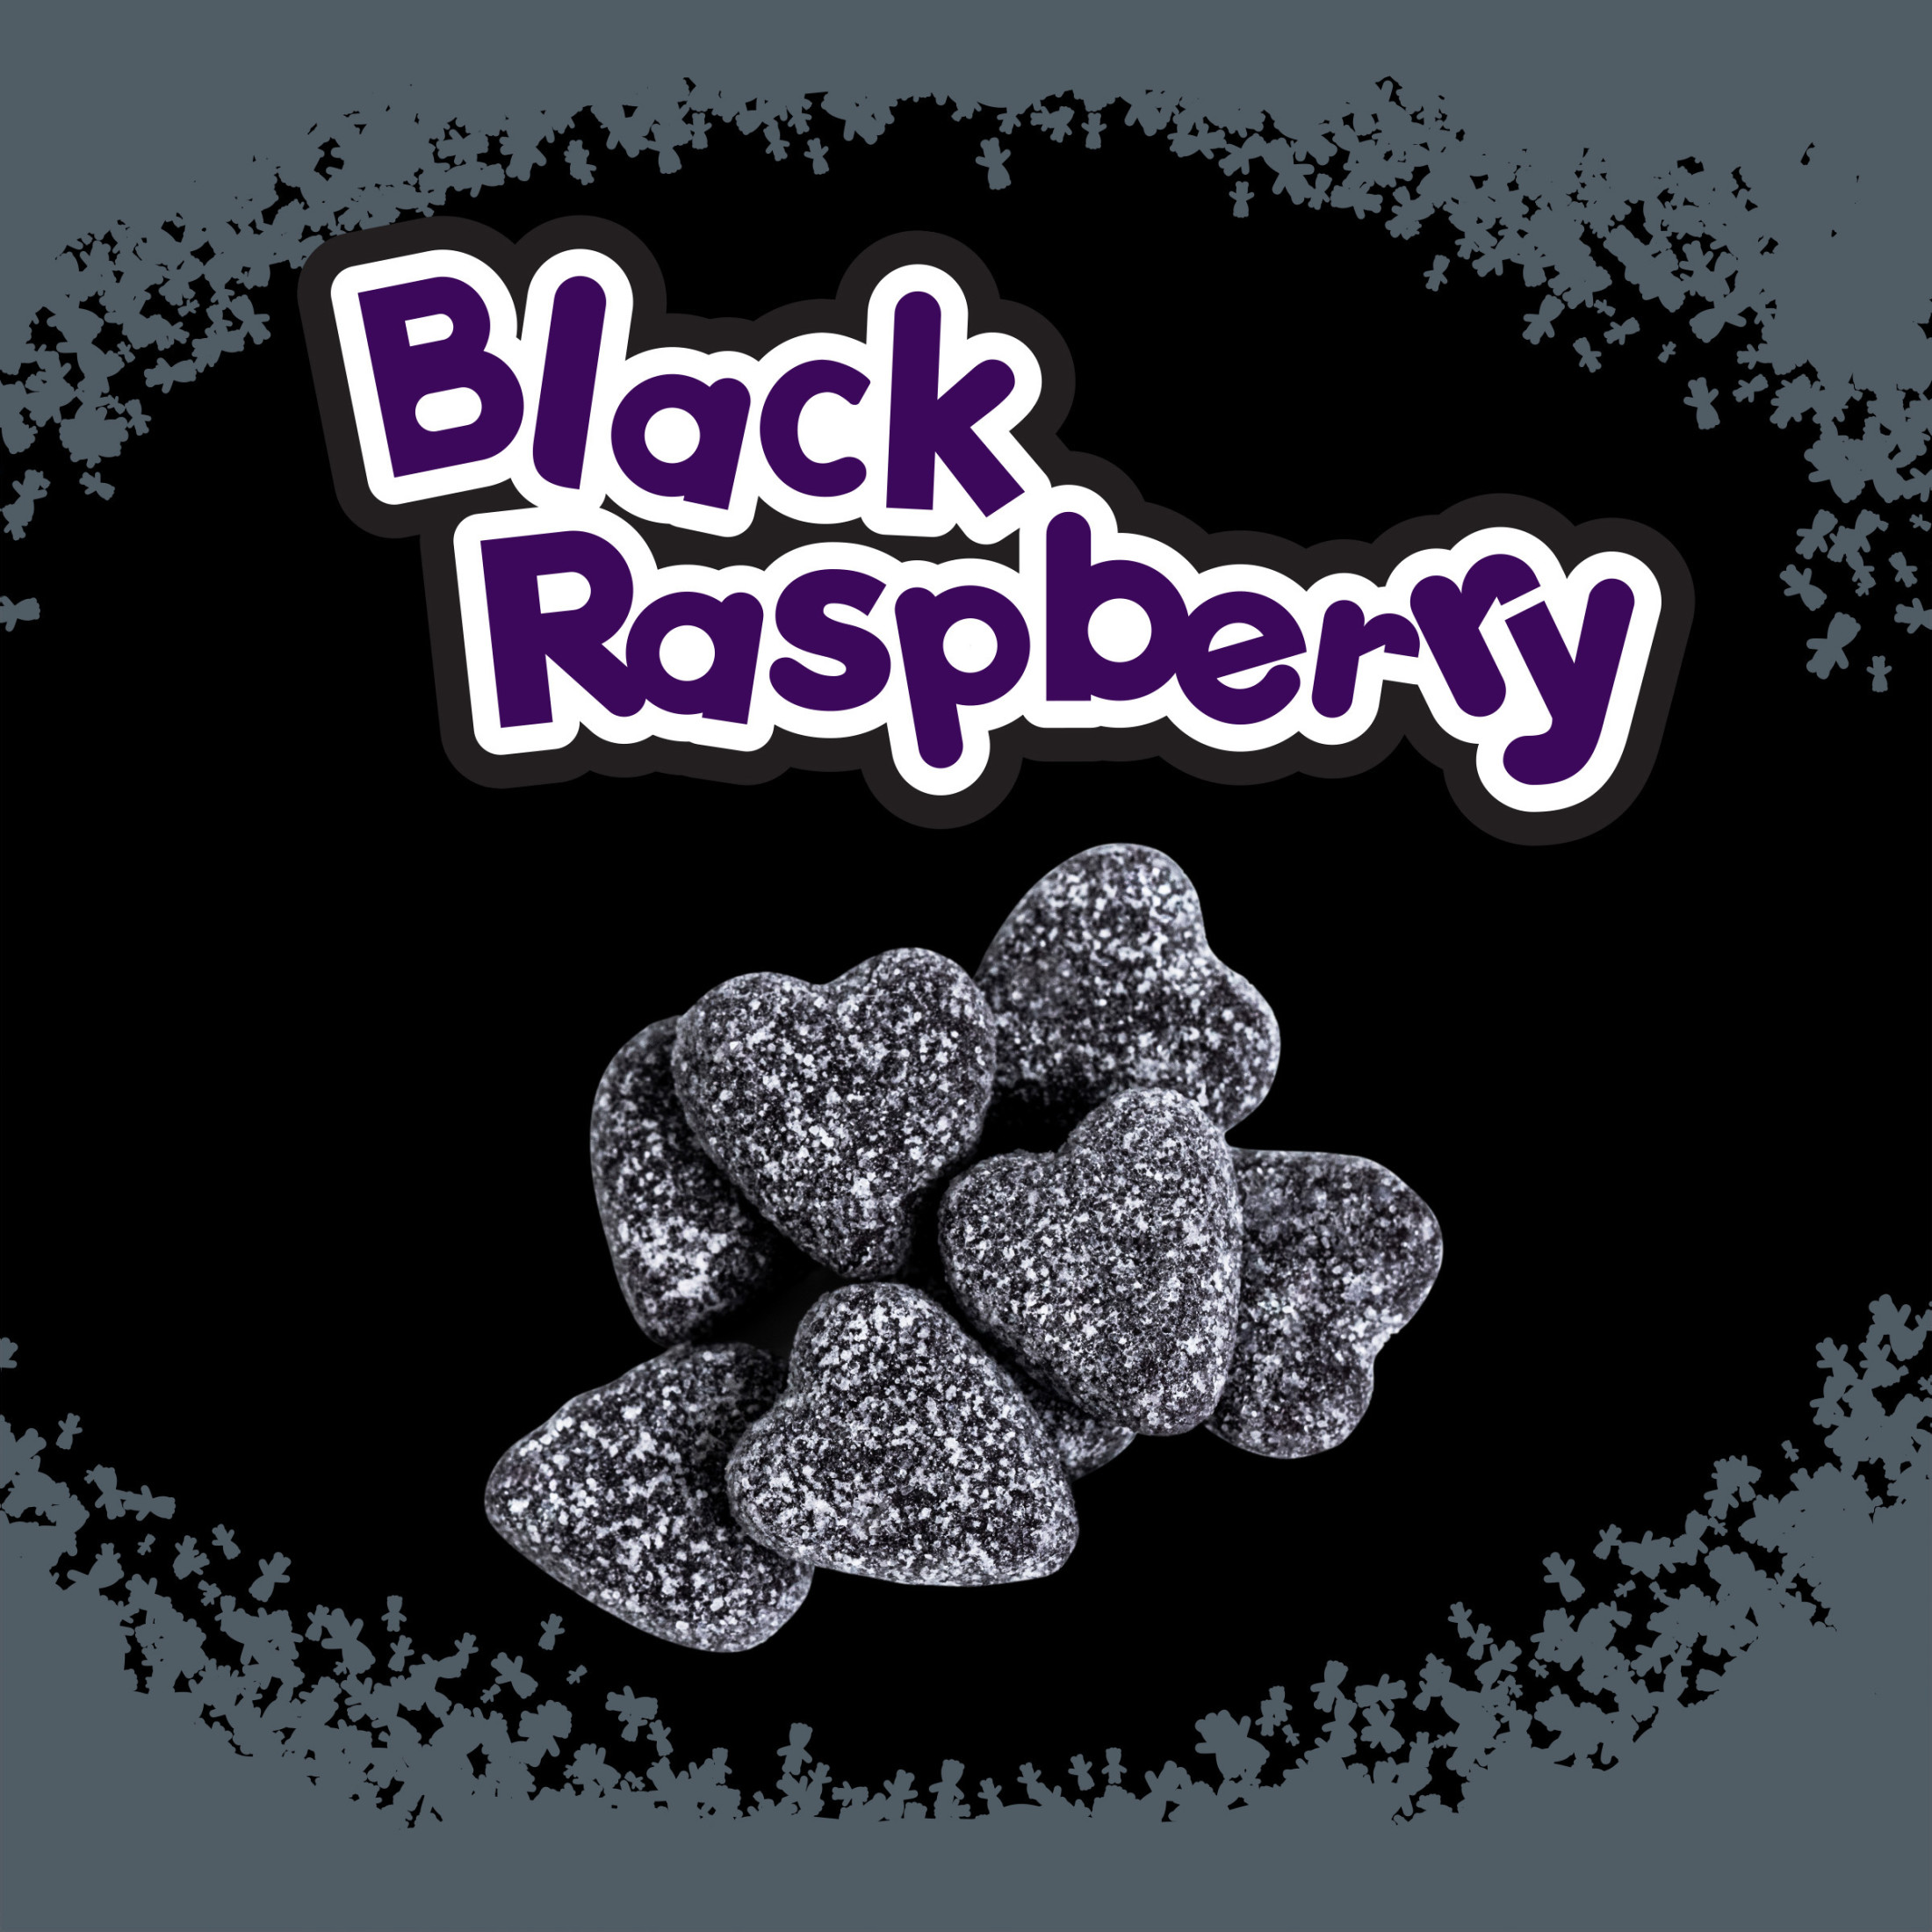 SOUR PATCH KIDS Sour Hearts Black Raspberry Soft & Chewy Candy, Valentines Candy, 3.08 oz - image 5 of 10